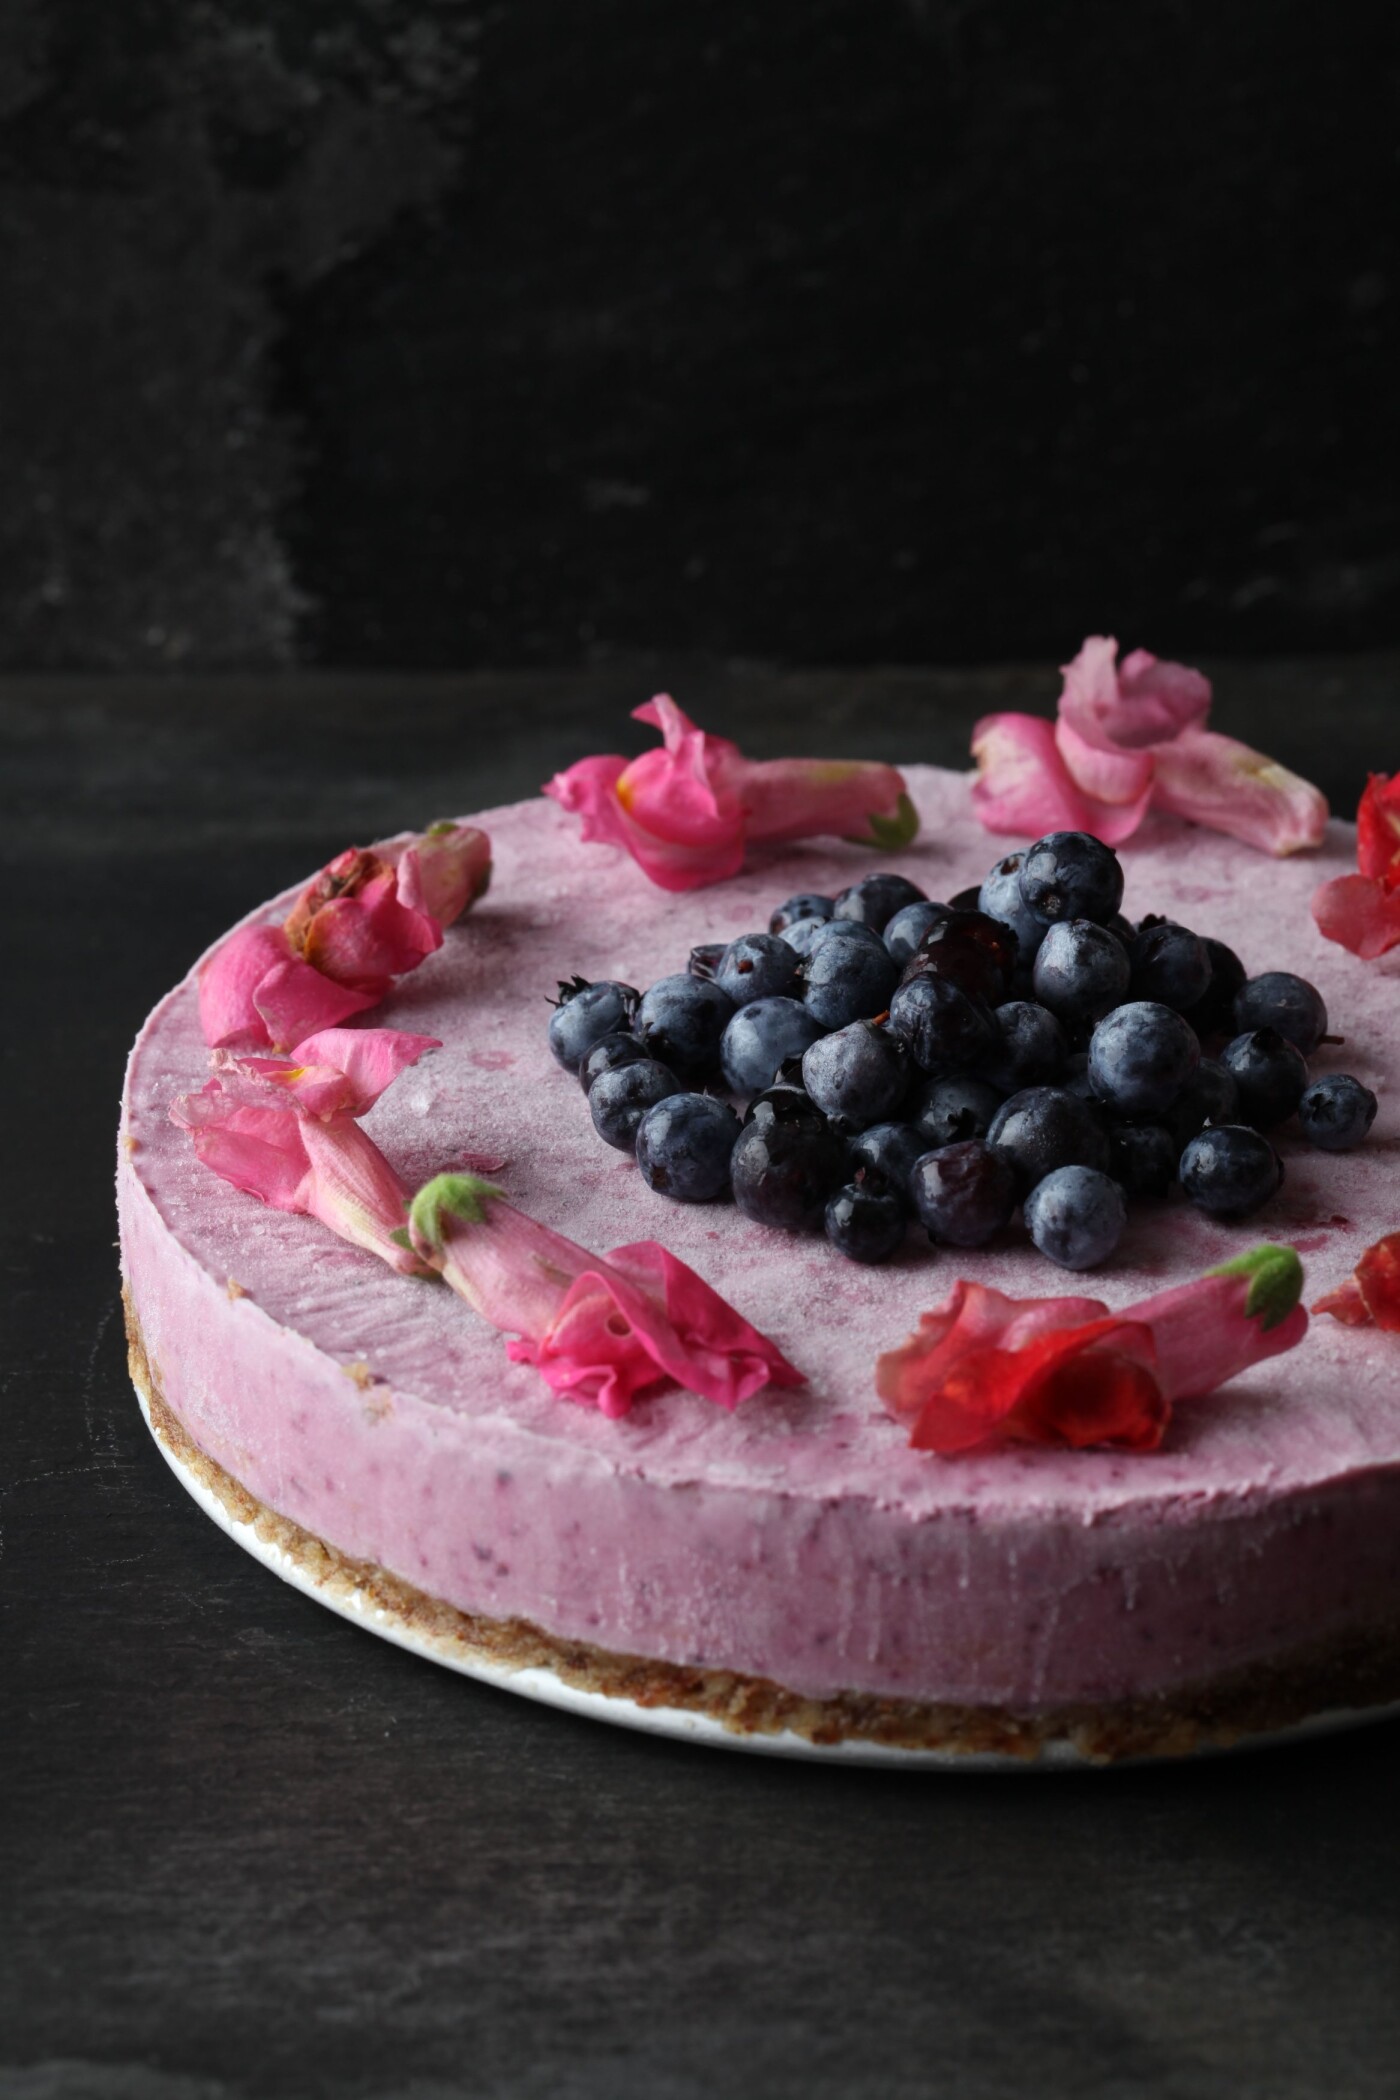 I've dabbled with a raw vegan diet in the past and have always wanted to make a raw "cheesecake".  I found this recipe online- it is a Lemon Blueberry version. The background is made of slate roof tiles from a local salvage shop.